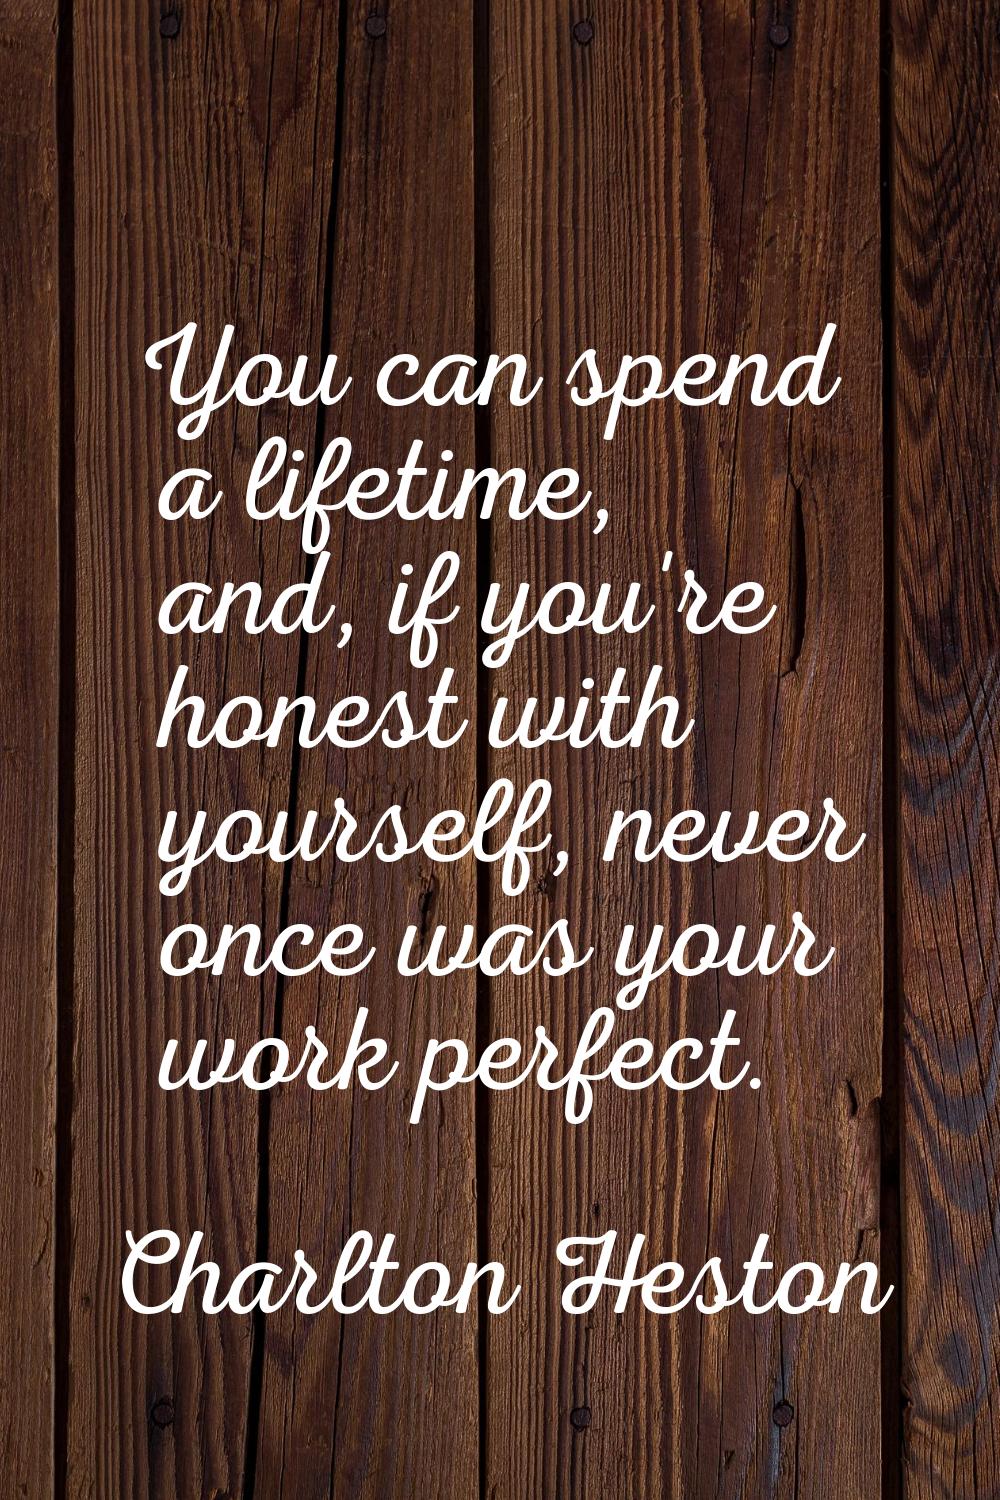 You can spend a lifetime, and, if you're honest with yourself, never once was your work perfect.